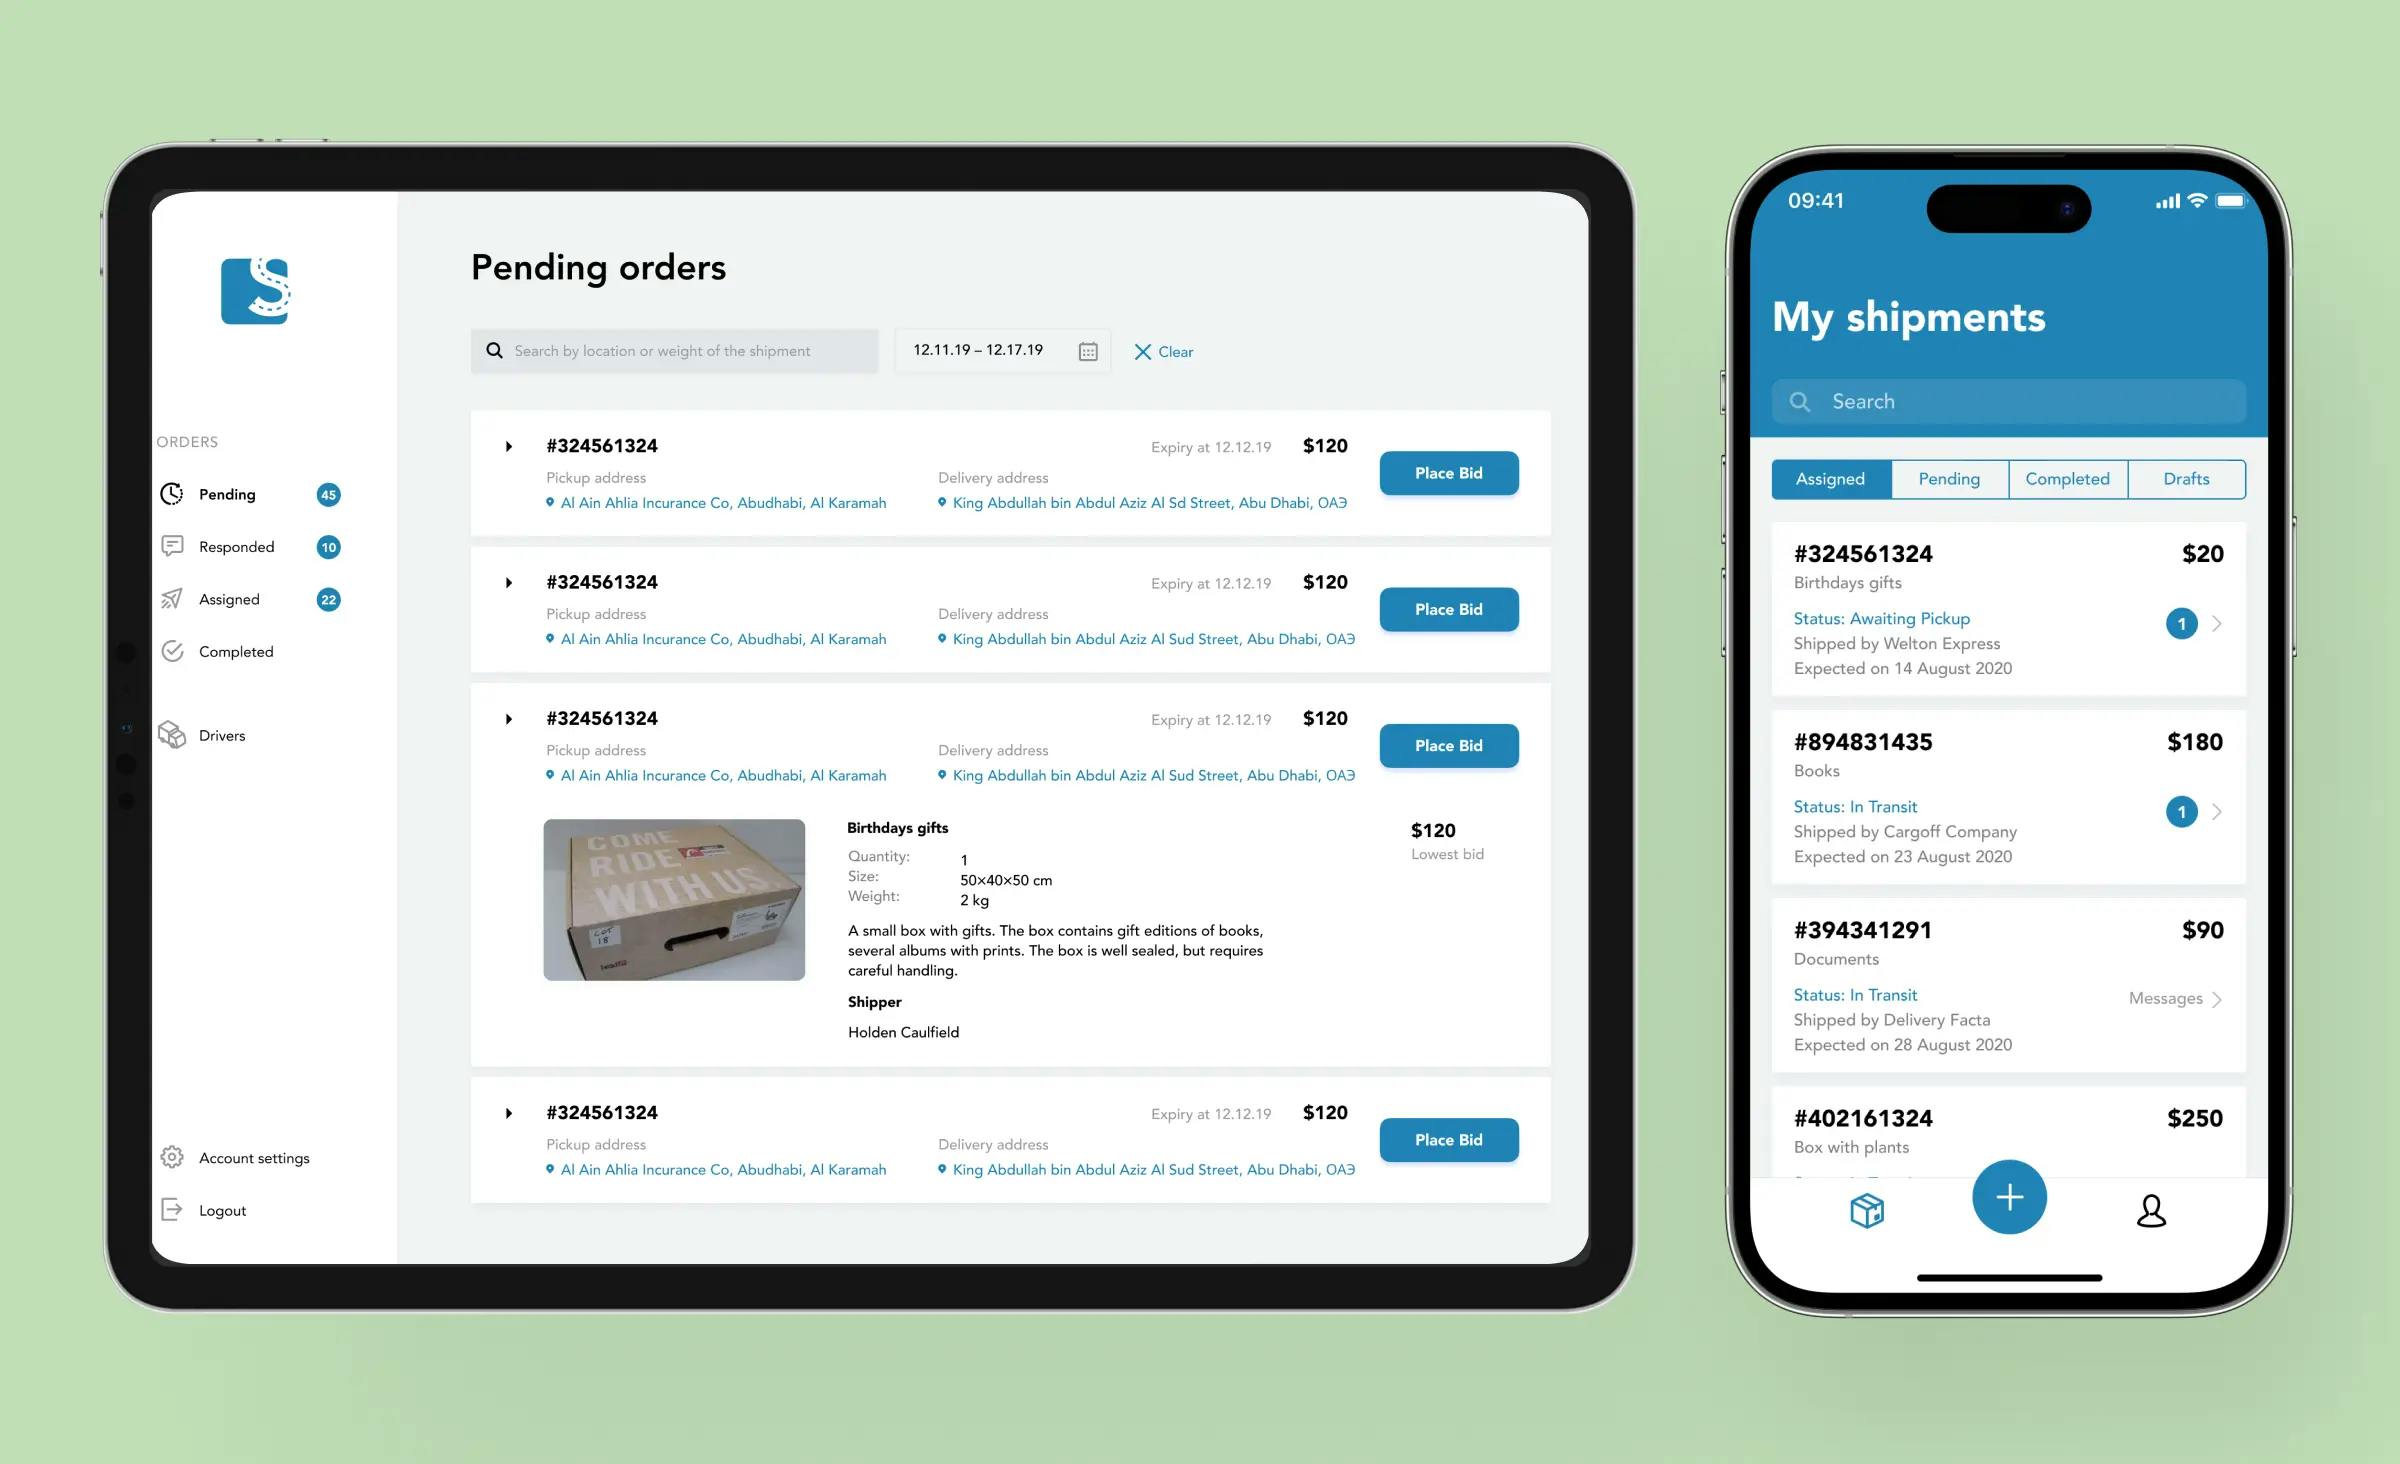 The ShipMe application integrates both mobile and web logistics software development for efficient management of the delivery process. The image displays a web app for corporate managers open on a pending orders page, along with a mobile screen for the client open on the 'My Shipments' page.